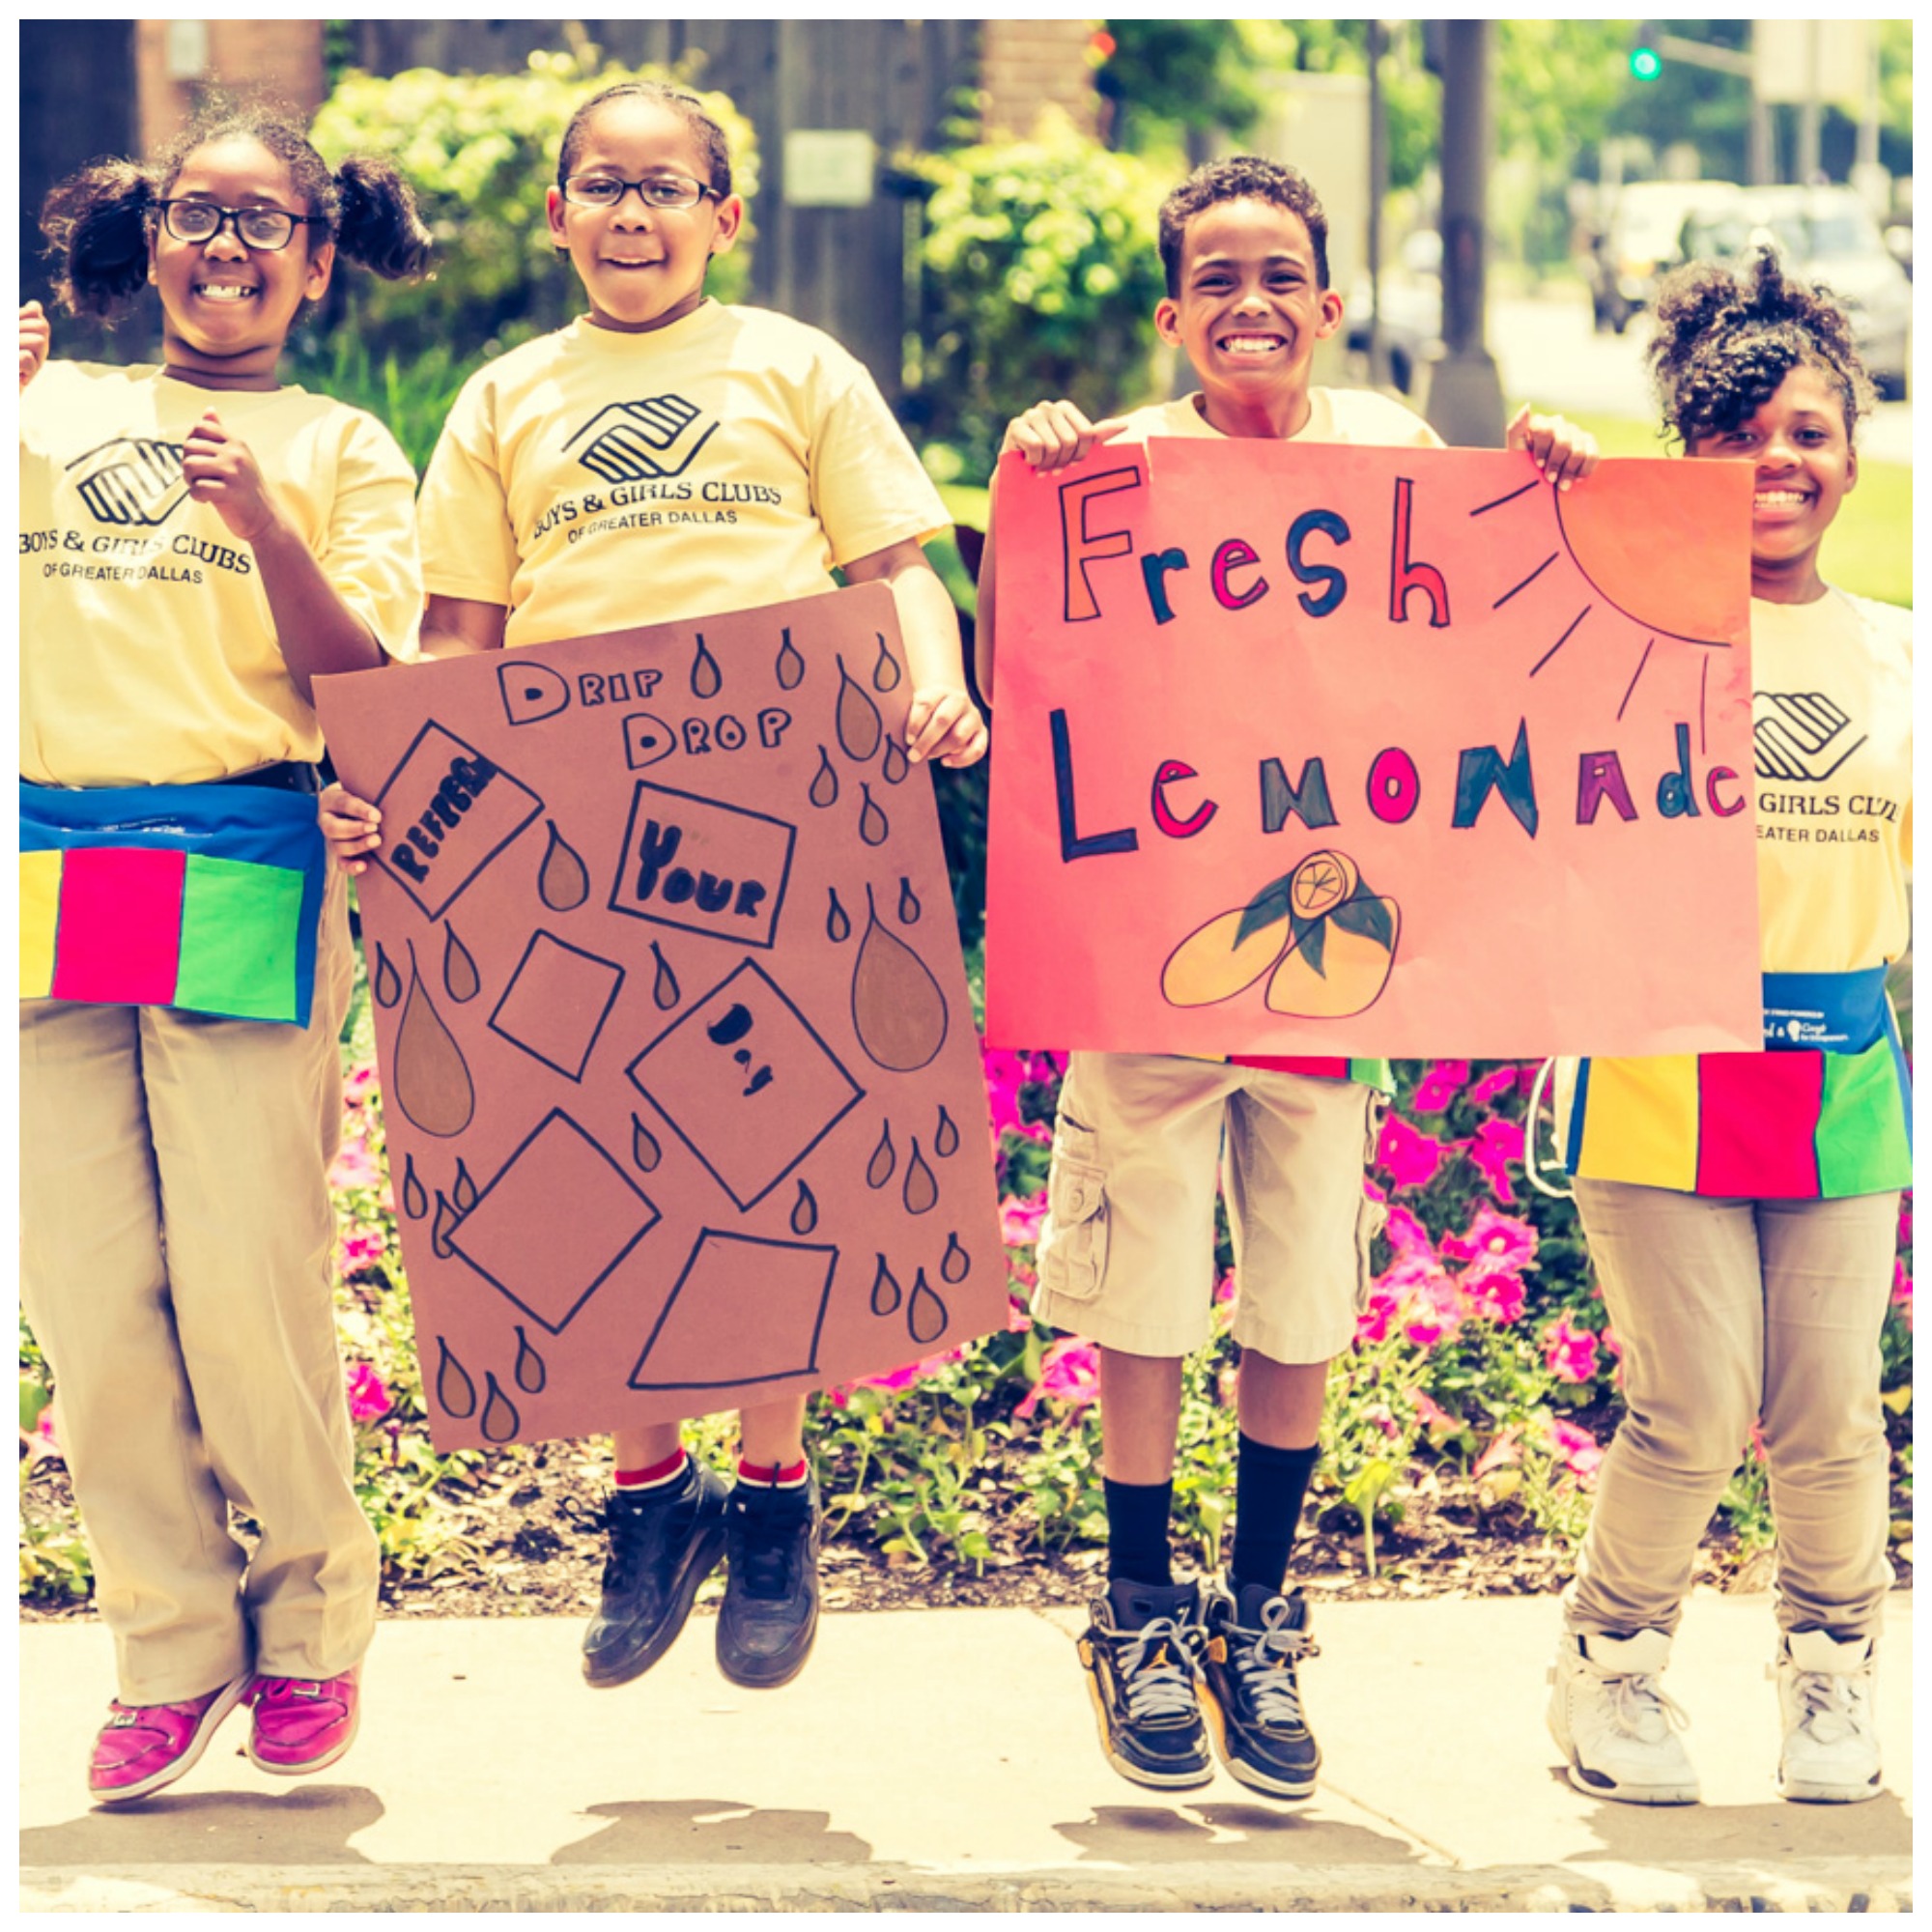 Four kids wearing yellow shirts that say "Boys and Girls Clubs" jump up and down in excitement while holding handmade signs that say "Drip Drop" and "Fresh Lemonade" 